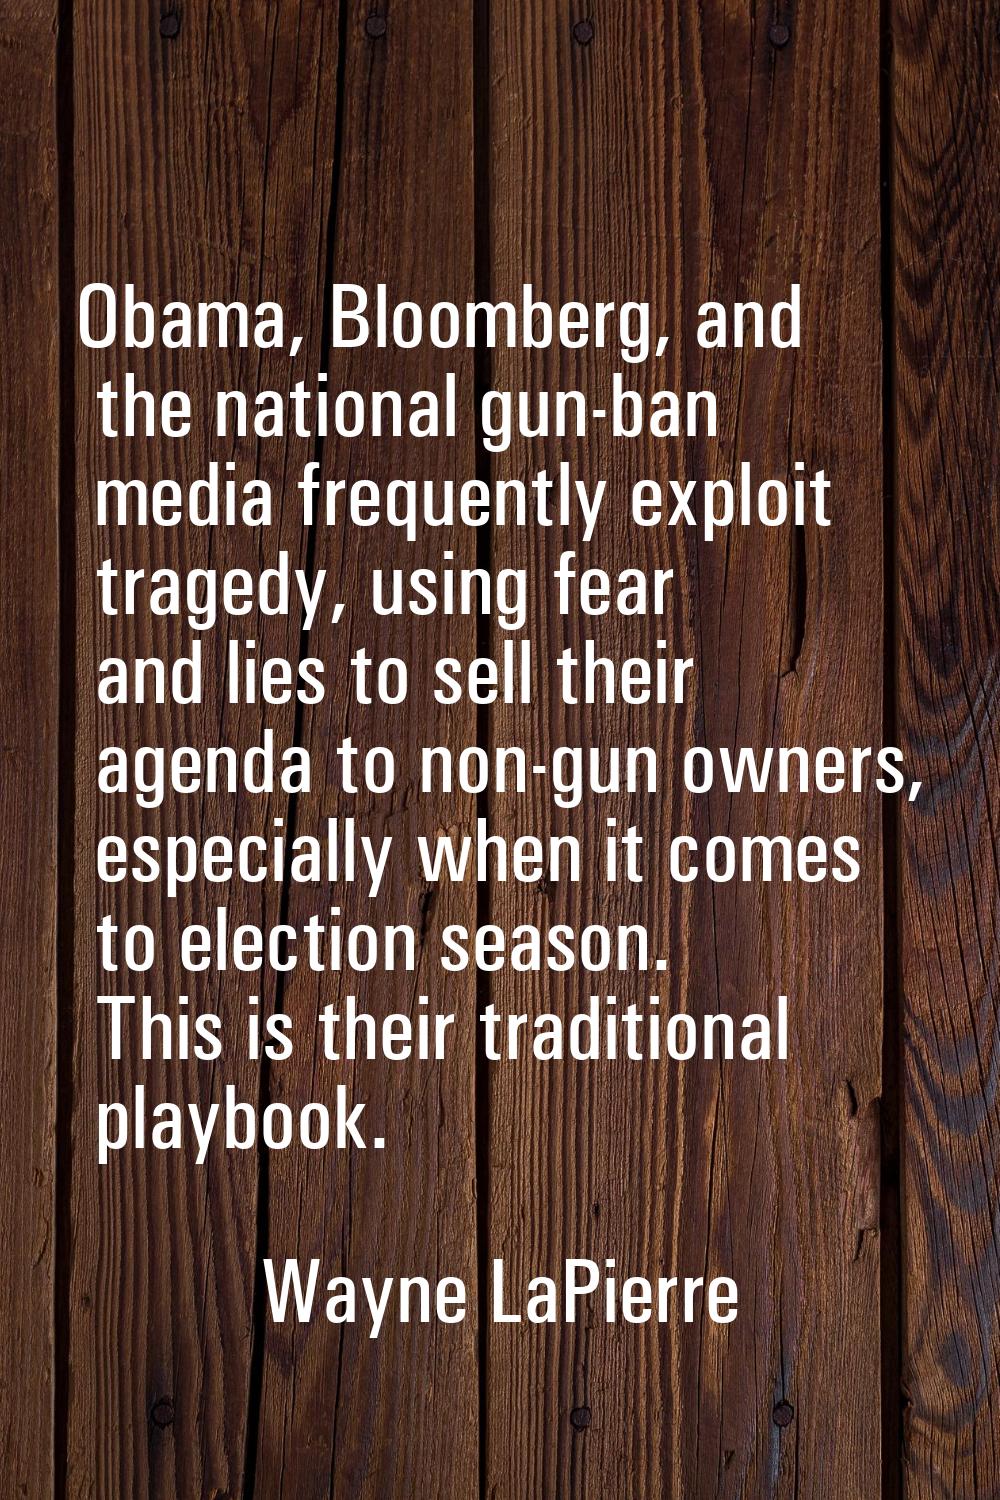 Obama, Bloomberg, and the national gun-ban media frequently exploit tragedy, using fear and lies to